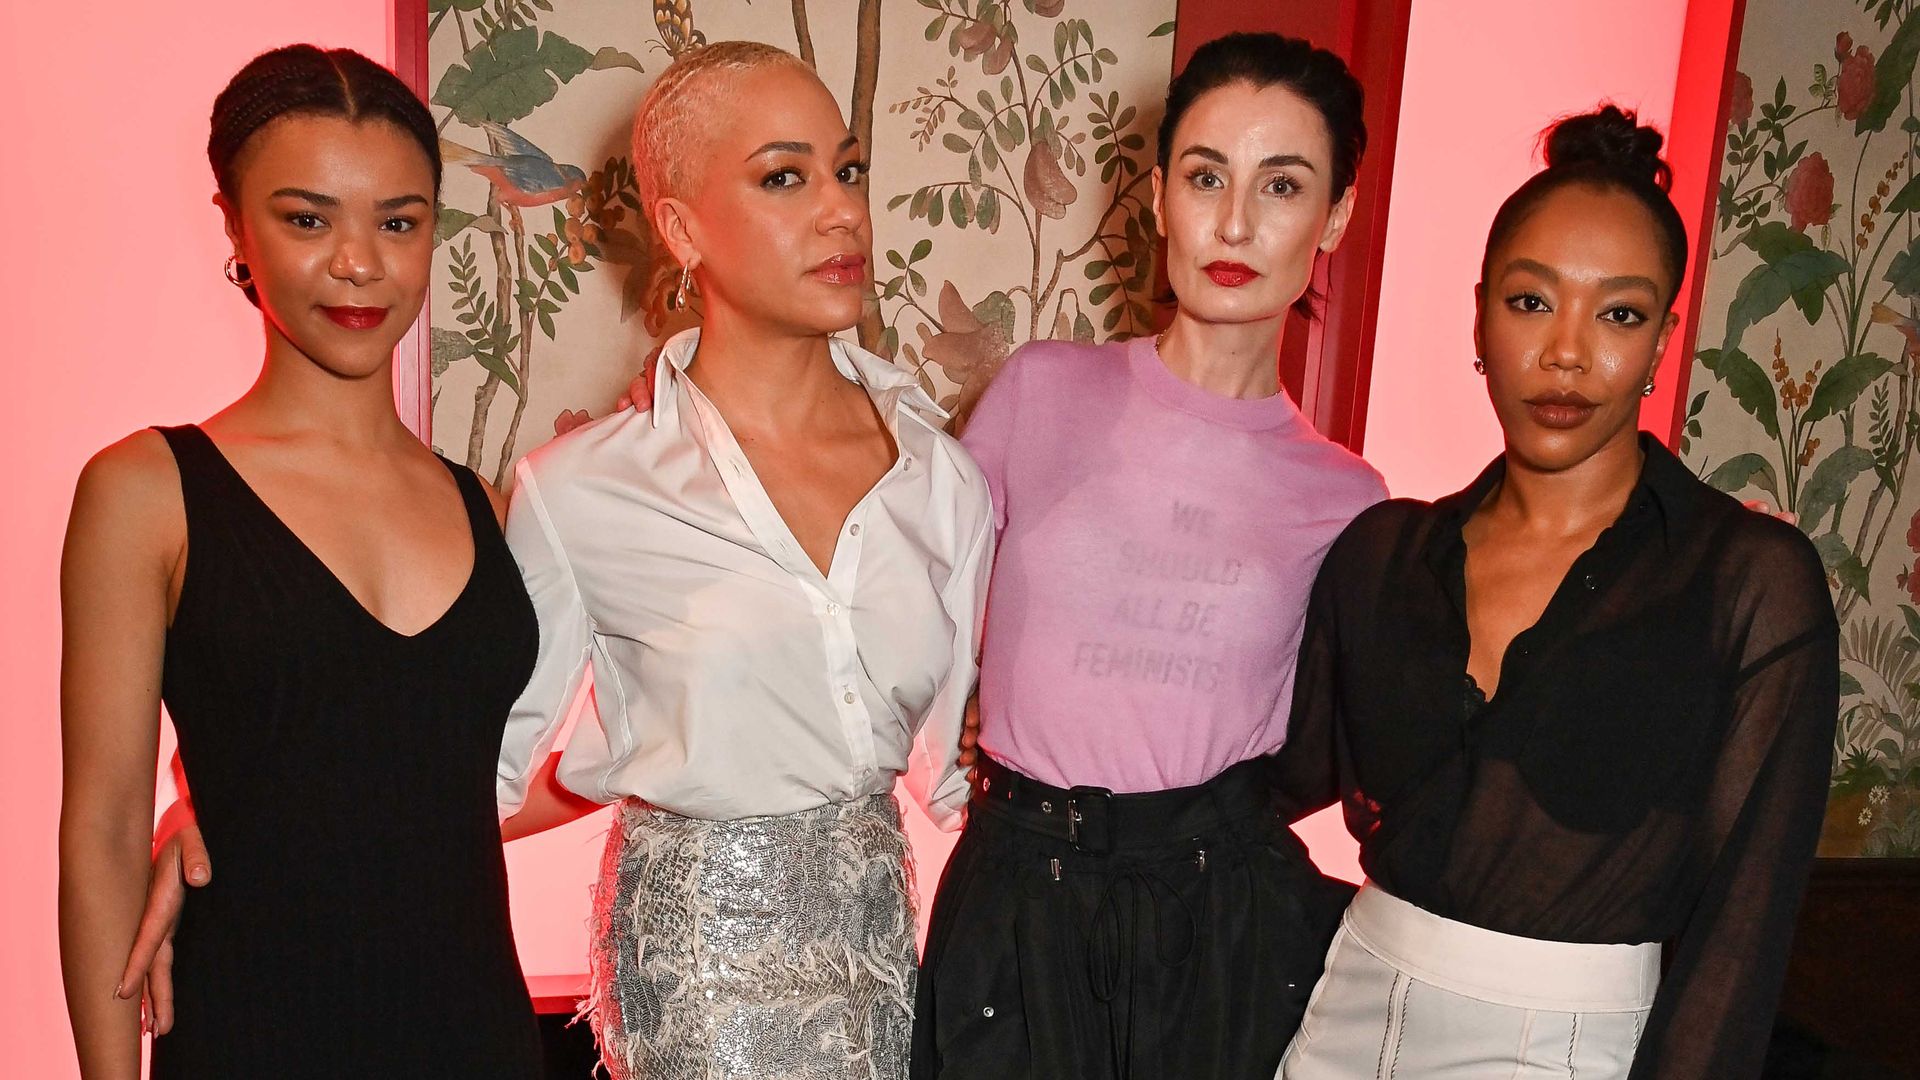 Erin O'Connor leads the glamorous ladies paying lip service to cult make-up brand at exclusive party